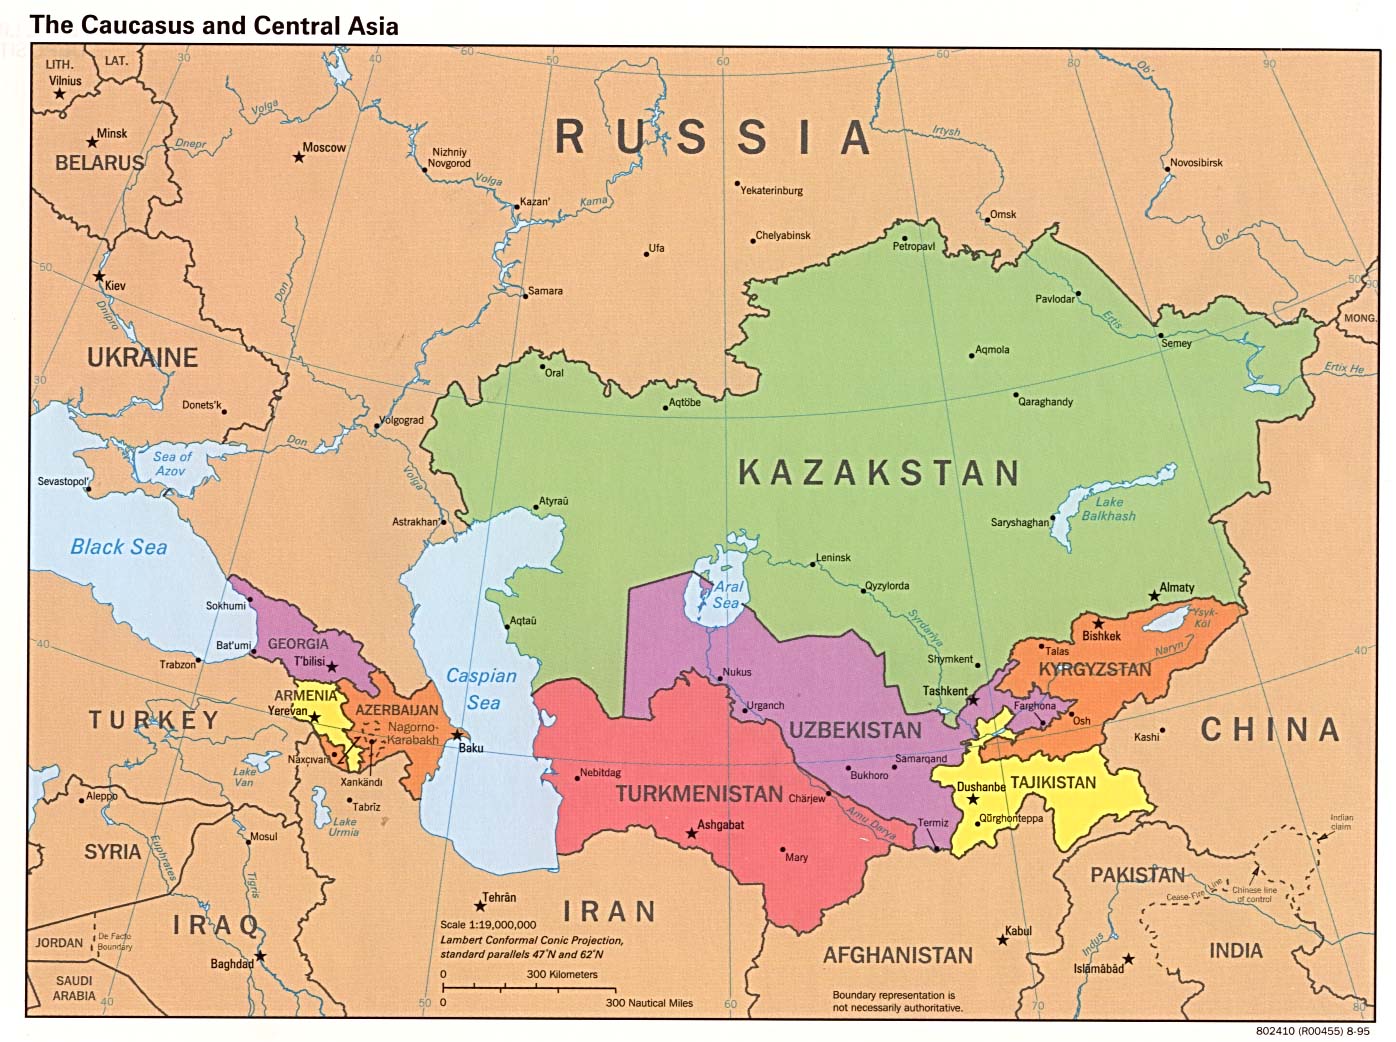 Map Of Azerbaijan. Caucasus and Central Asia [Political Map] 1995 (231K) 